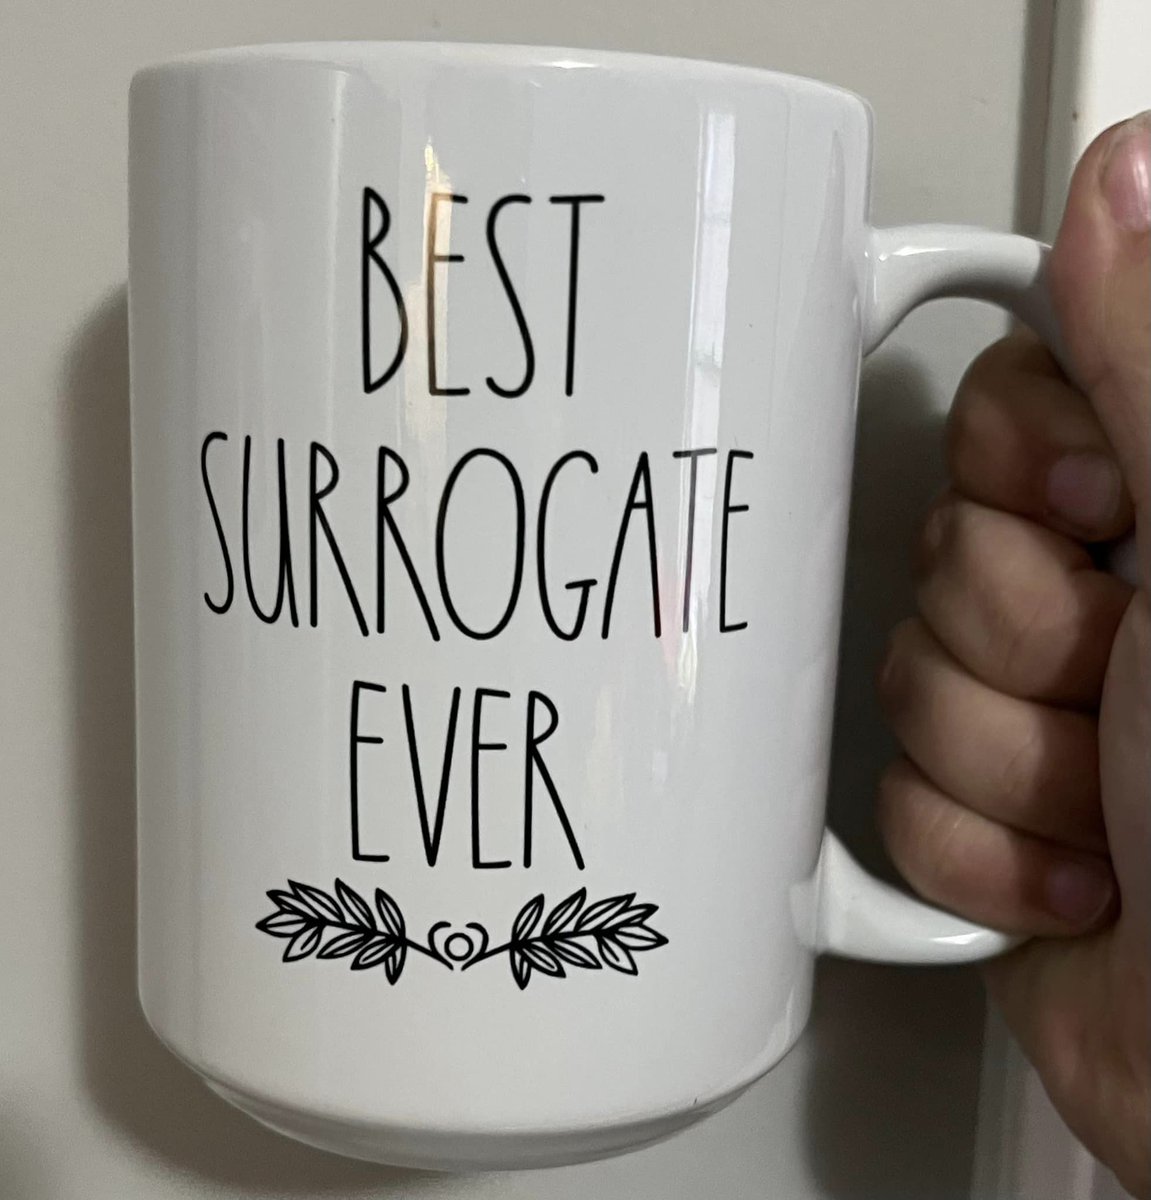 How adorable is this?! An incredibly thoughtful mug one of our Intended Parents sent to their Surrogate as a keepsake.

#surrogacy #surrogacycanada #canadiansurrogacy #surrogacyincanada #surrogate #surrolife #ivf #mereporteuse #intendedparents #scobabies